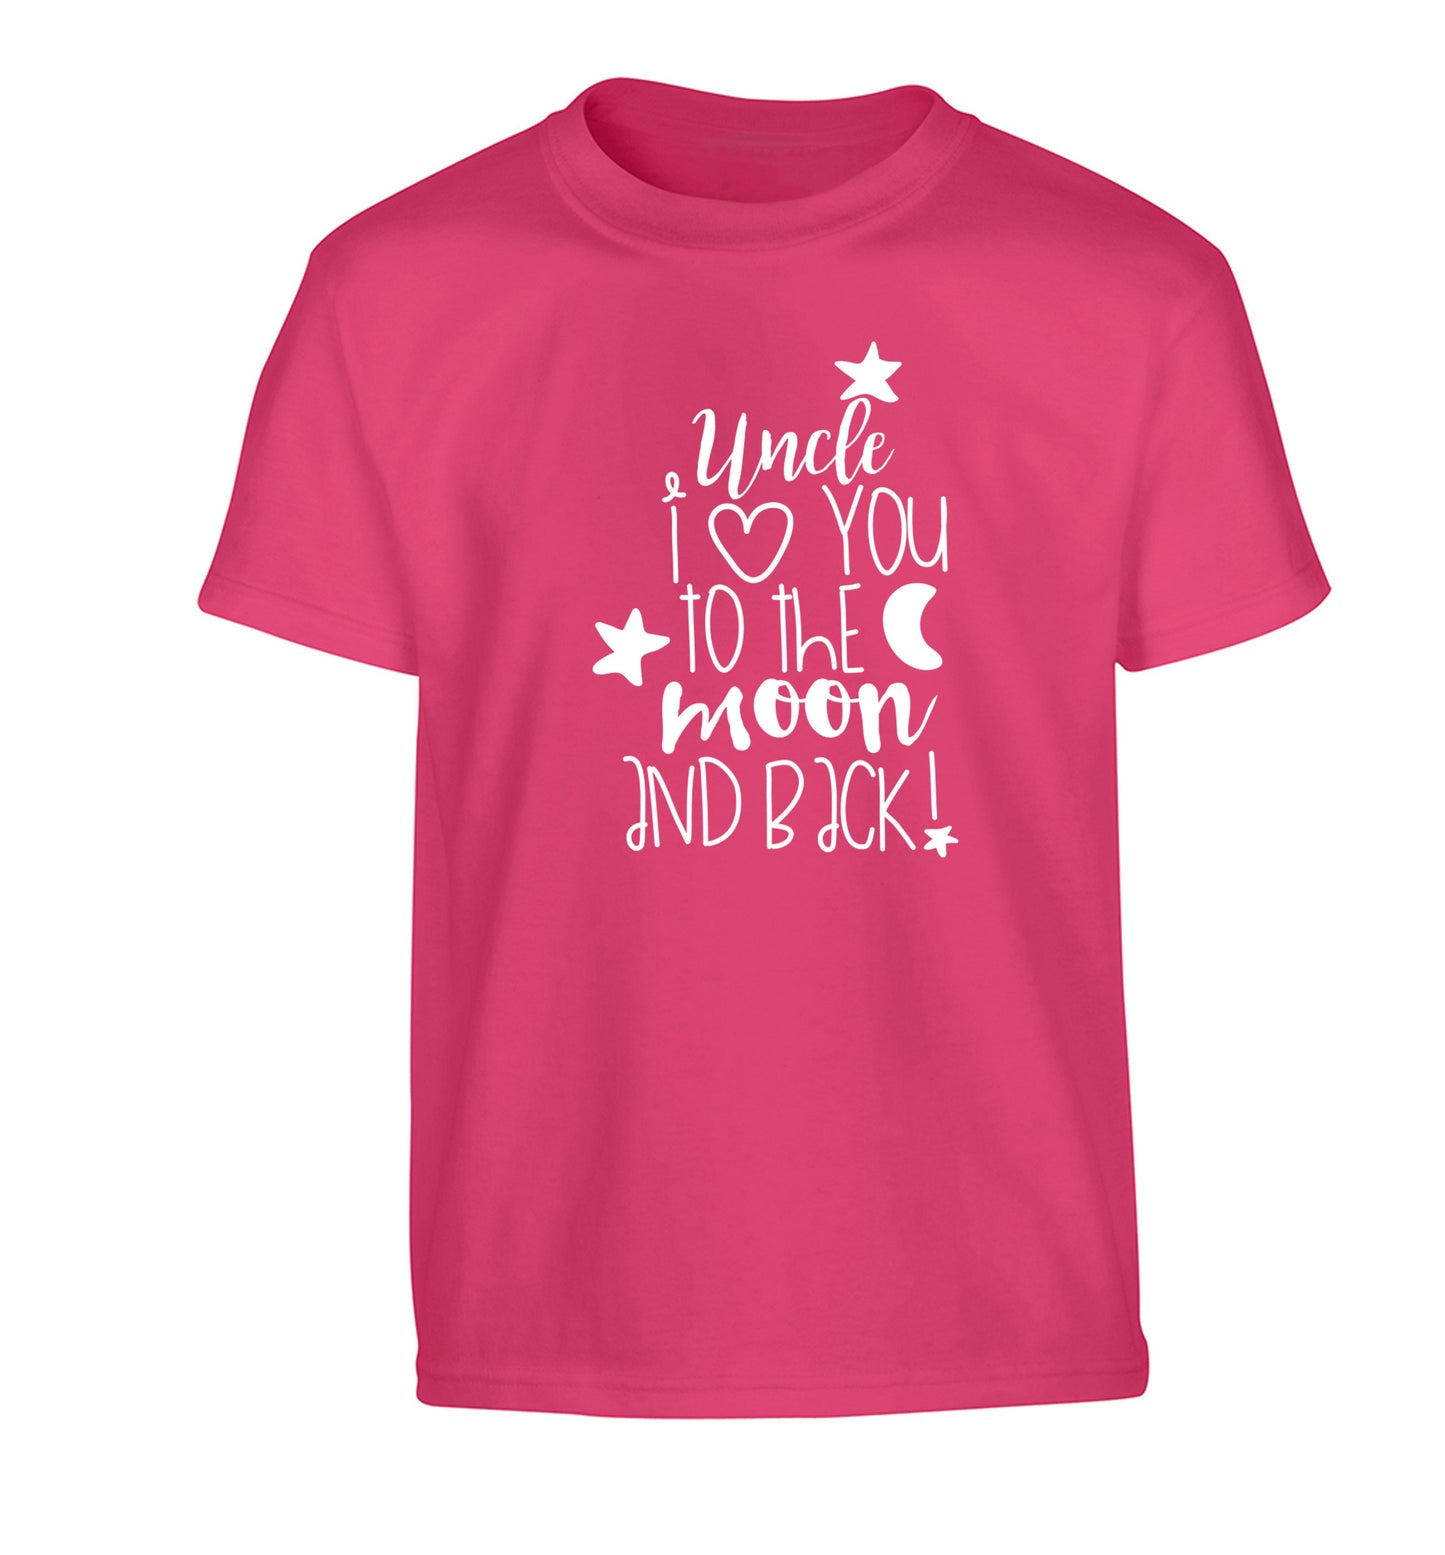 Uncle I love you to the moon and back Children's pink Tshirt 12-14 Years